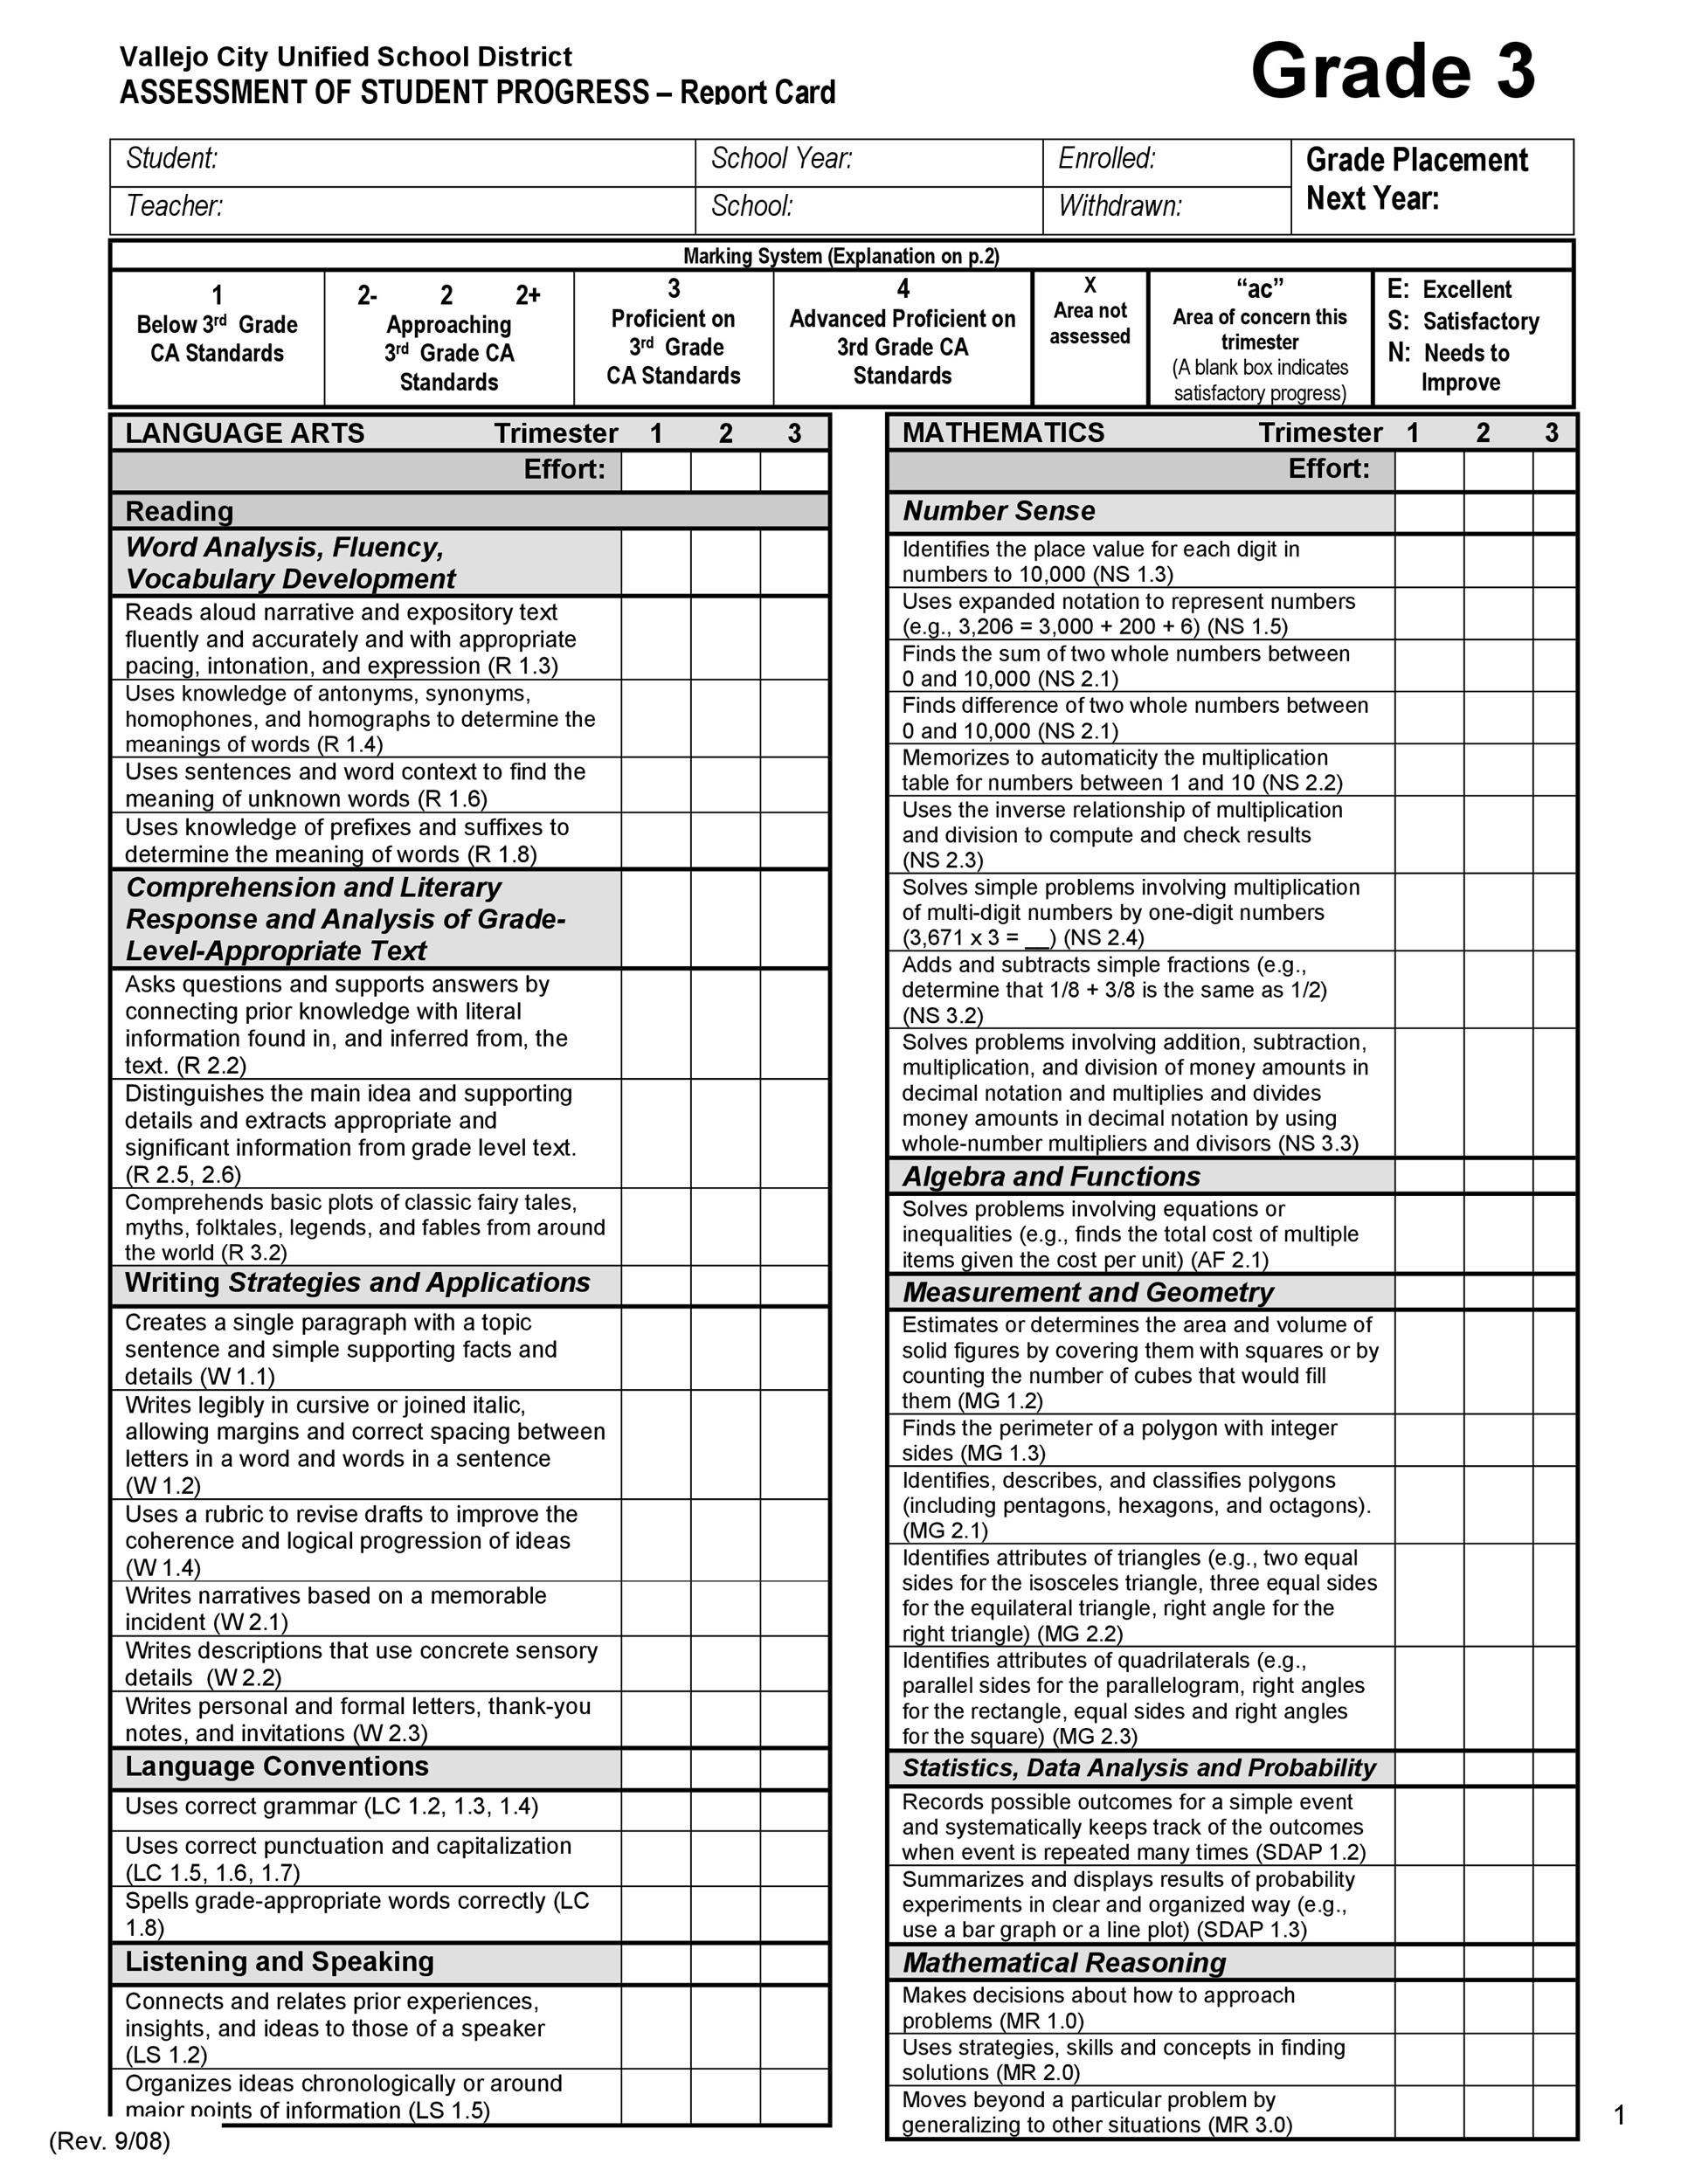 Free Report Card Template 21